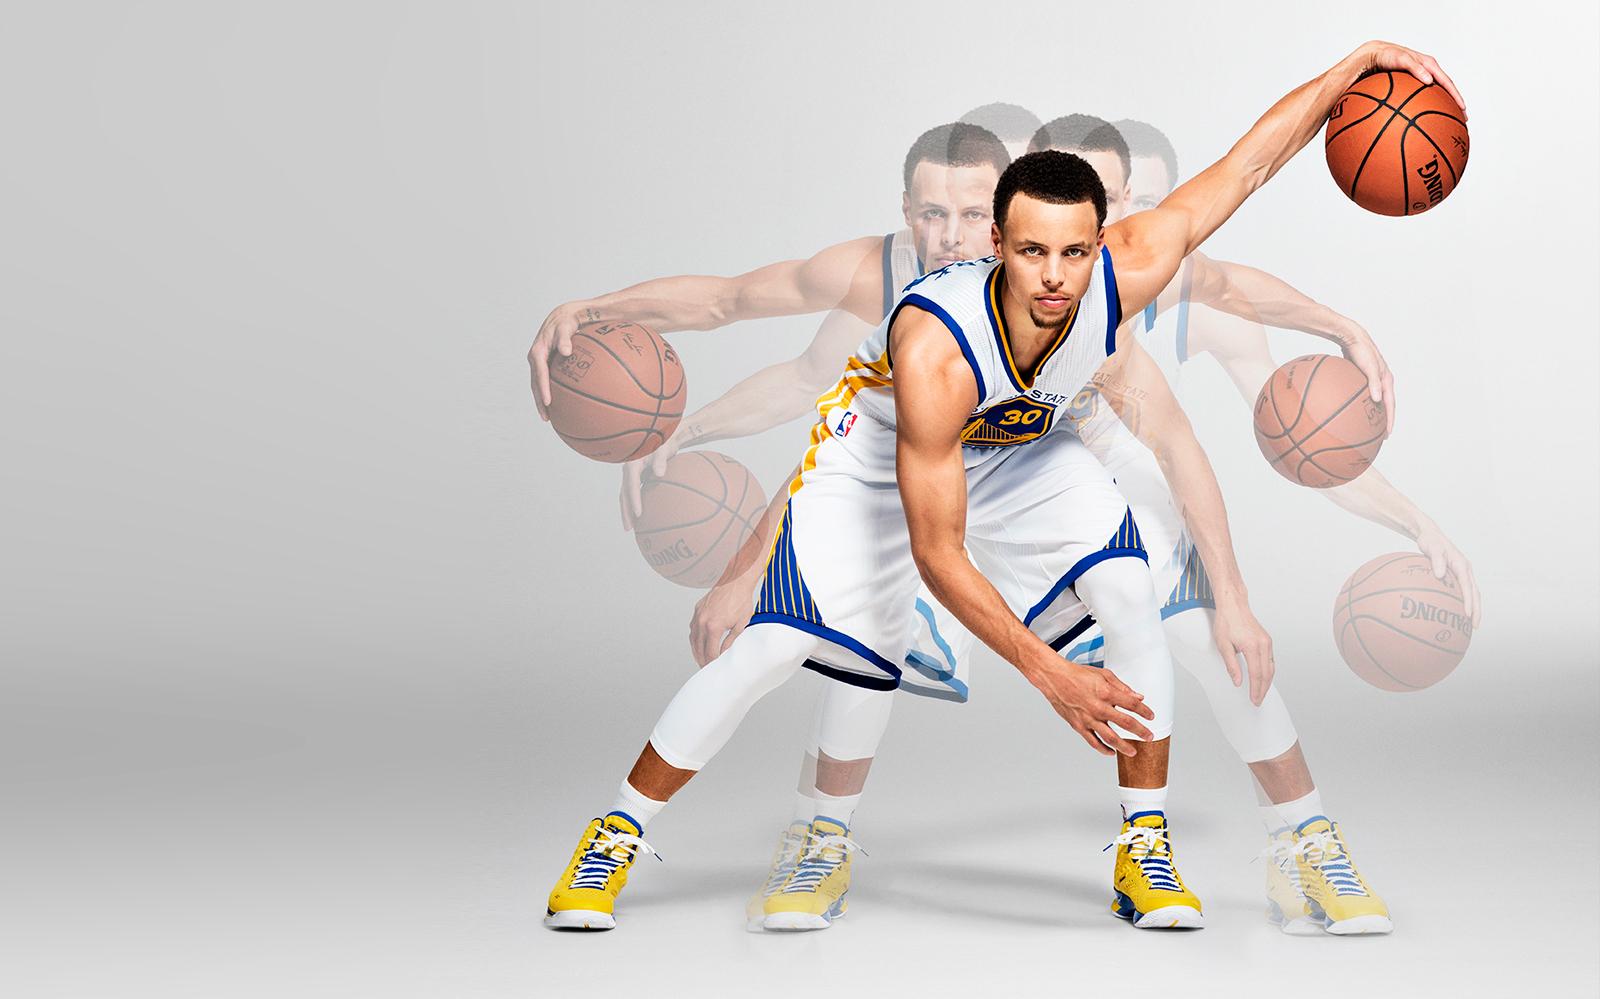 Free Curry 30 Wallpaper, Curry 30 Wallpaper Download